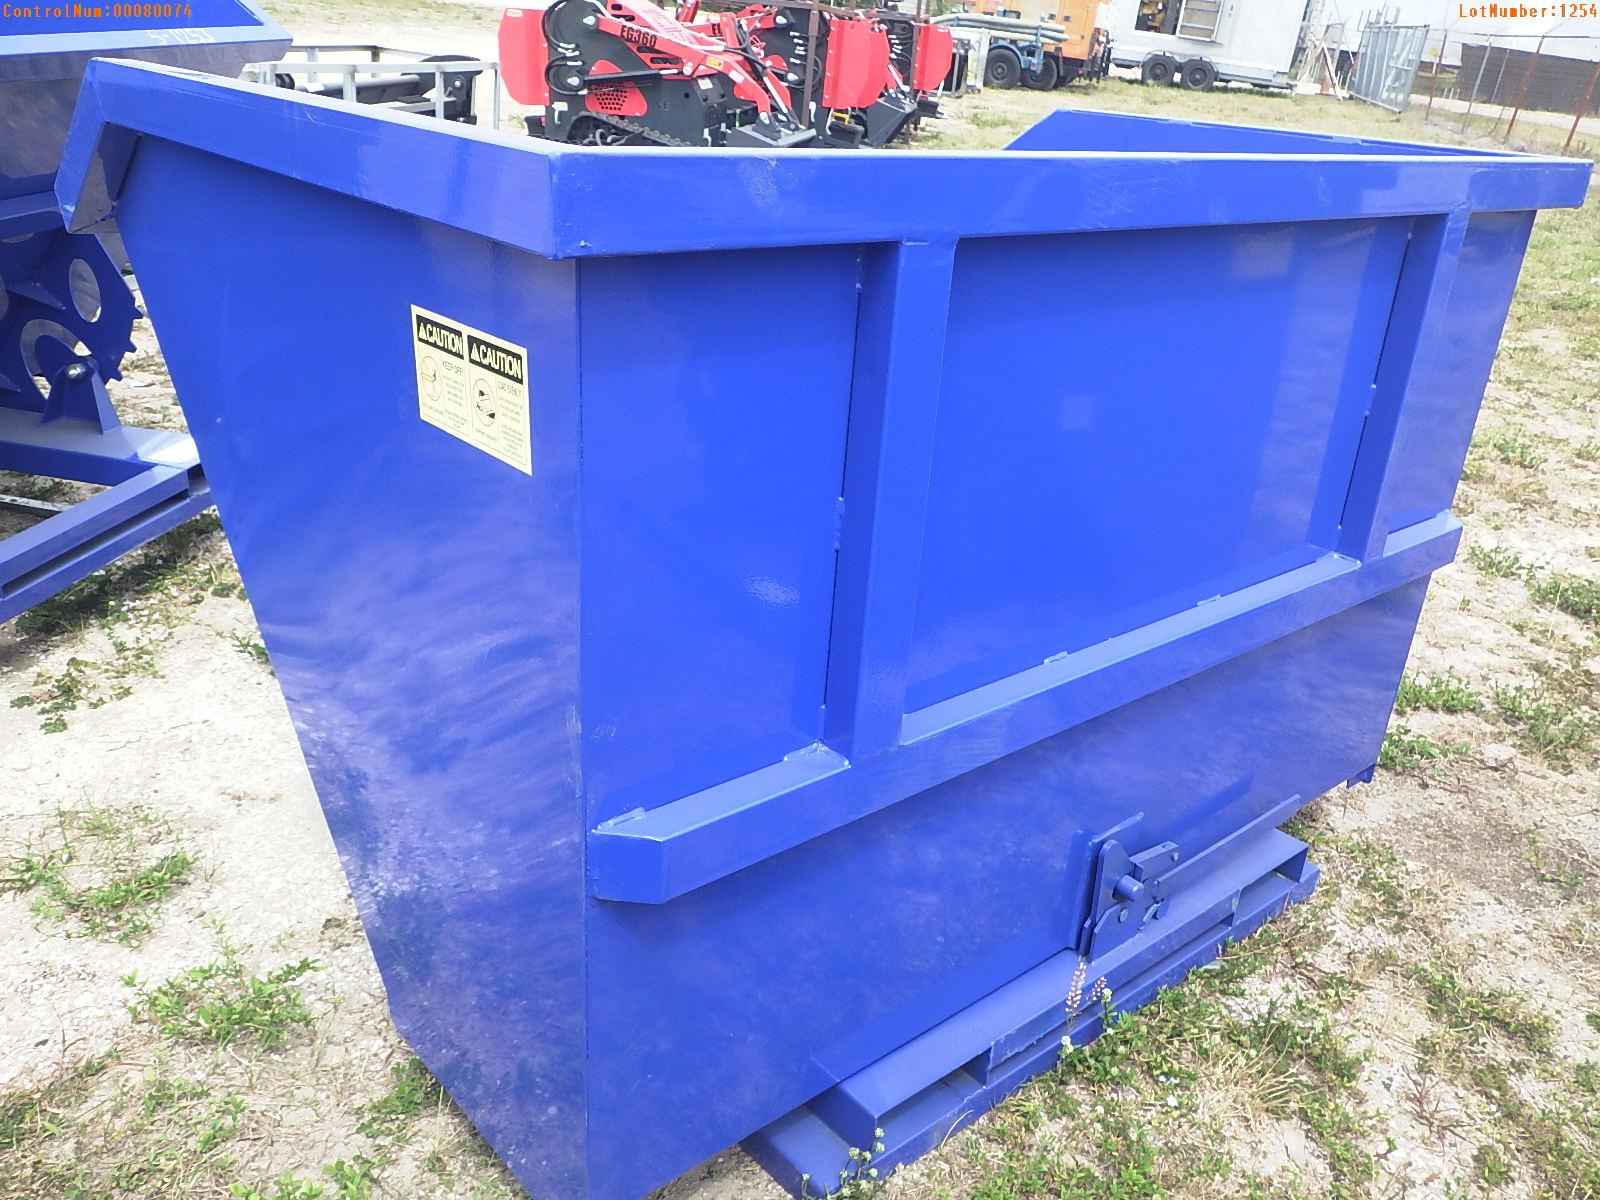 5-01254 (Equip.-Implement misc.)  Seller:Private/Dealer GREATBEAR 1.5 CUBIC YARD